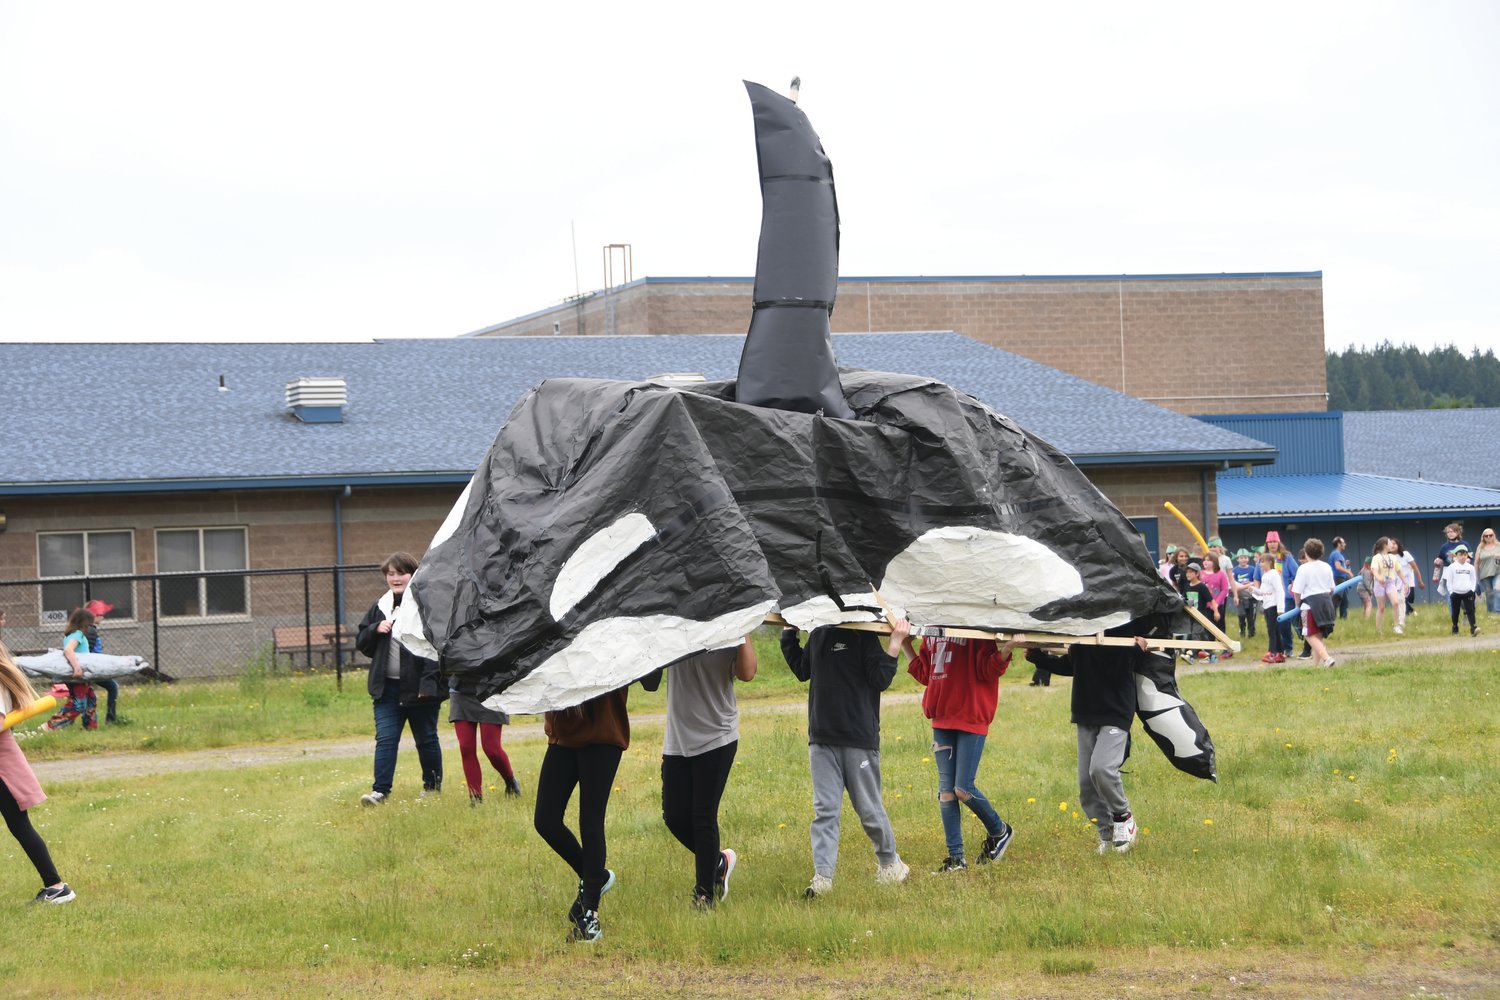 An orca contraption built by Chimacum Middle's sixth graders for the field day event.